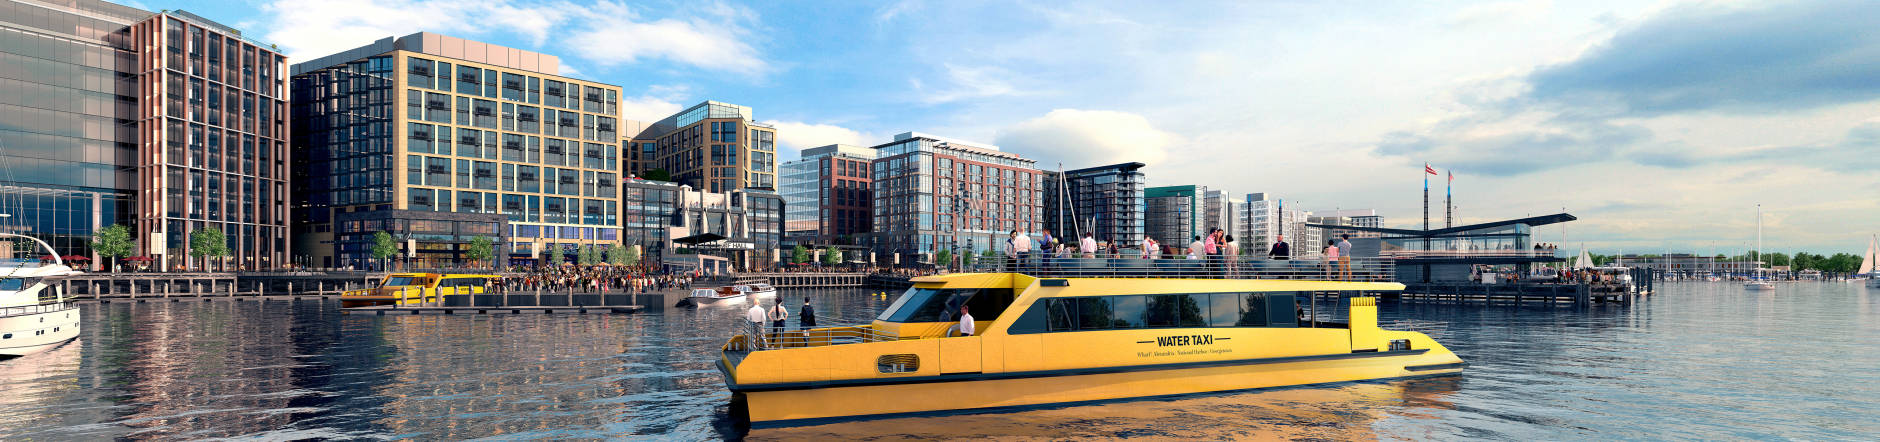 An artist's rendering depicts new water taxi boats being built for the Regional Water Taxi System. When District Wharf opens in October 2017, two of four new boats on order will complement an existing fleet of 13 taxi boats. (Courtesy The Wharf)